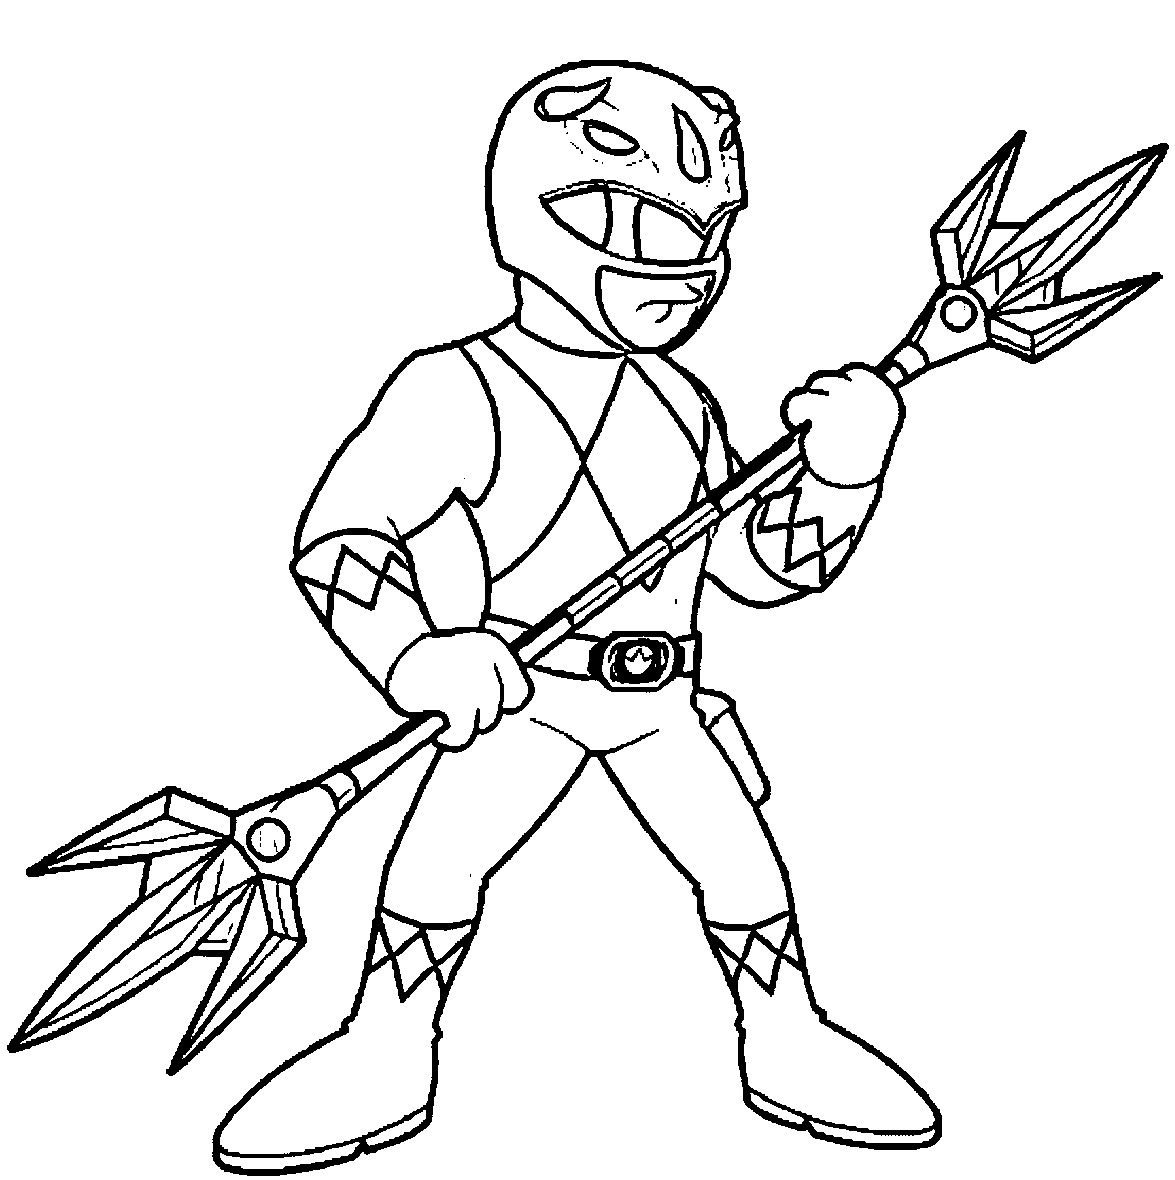 Power Rangers Rpm Coloring Pages Power Rangers Printable Coloring Pages Elegant Sam And Cat Coloring